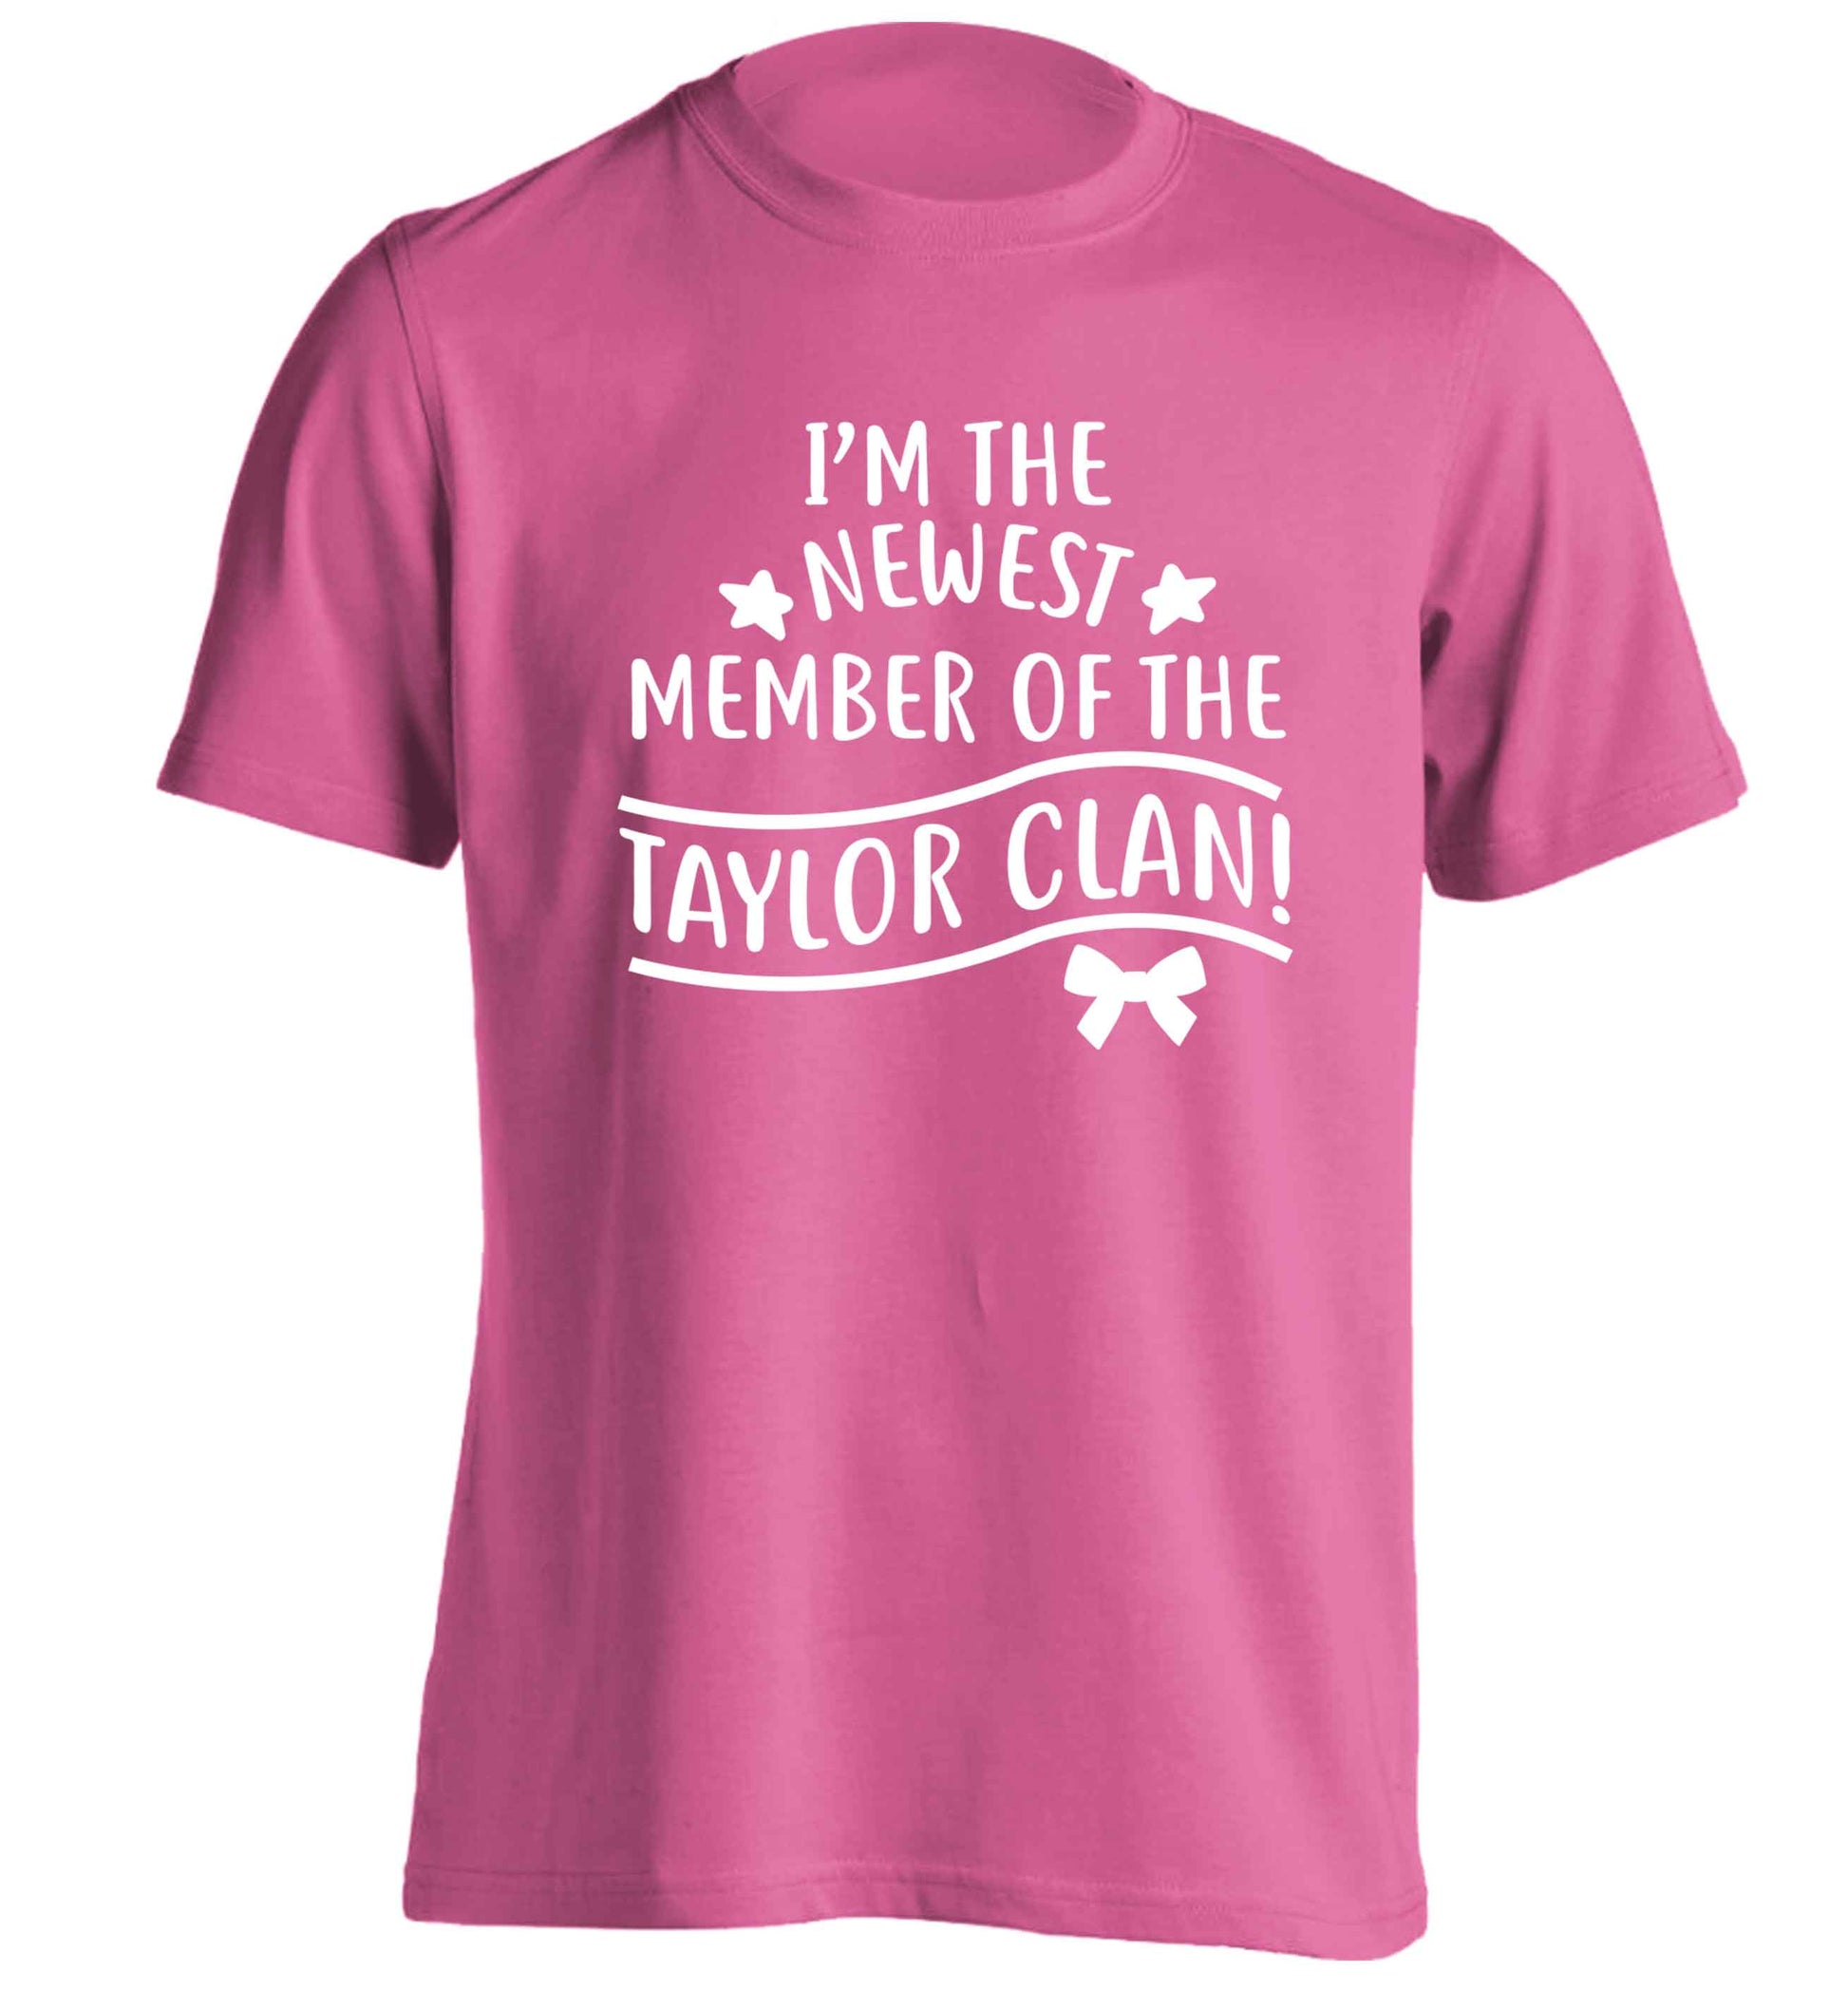 Personalised, newest member of the Taylor clan adults unisex pink Tshirt 2XL